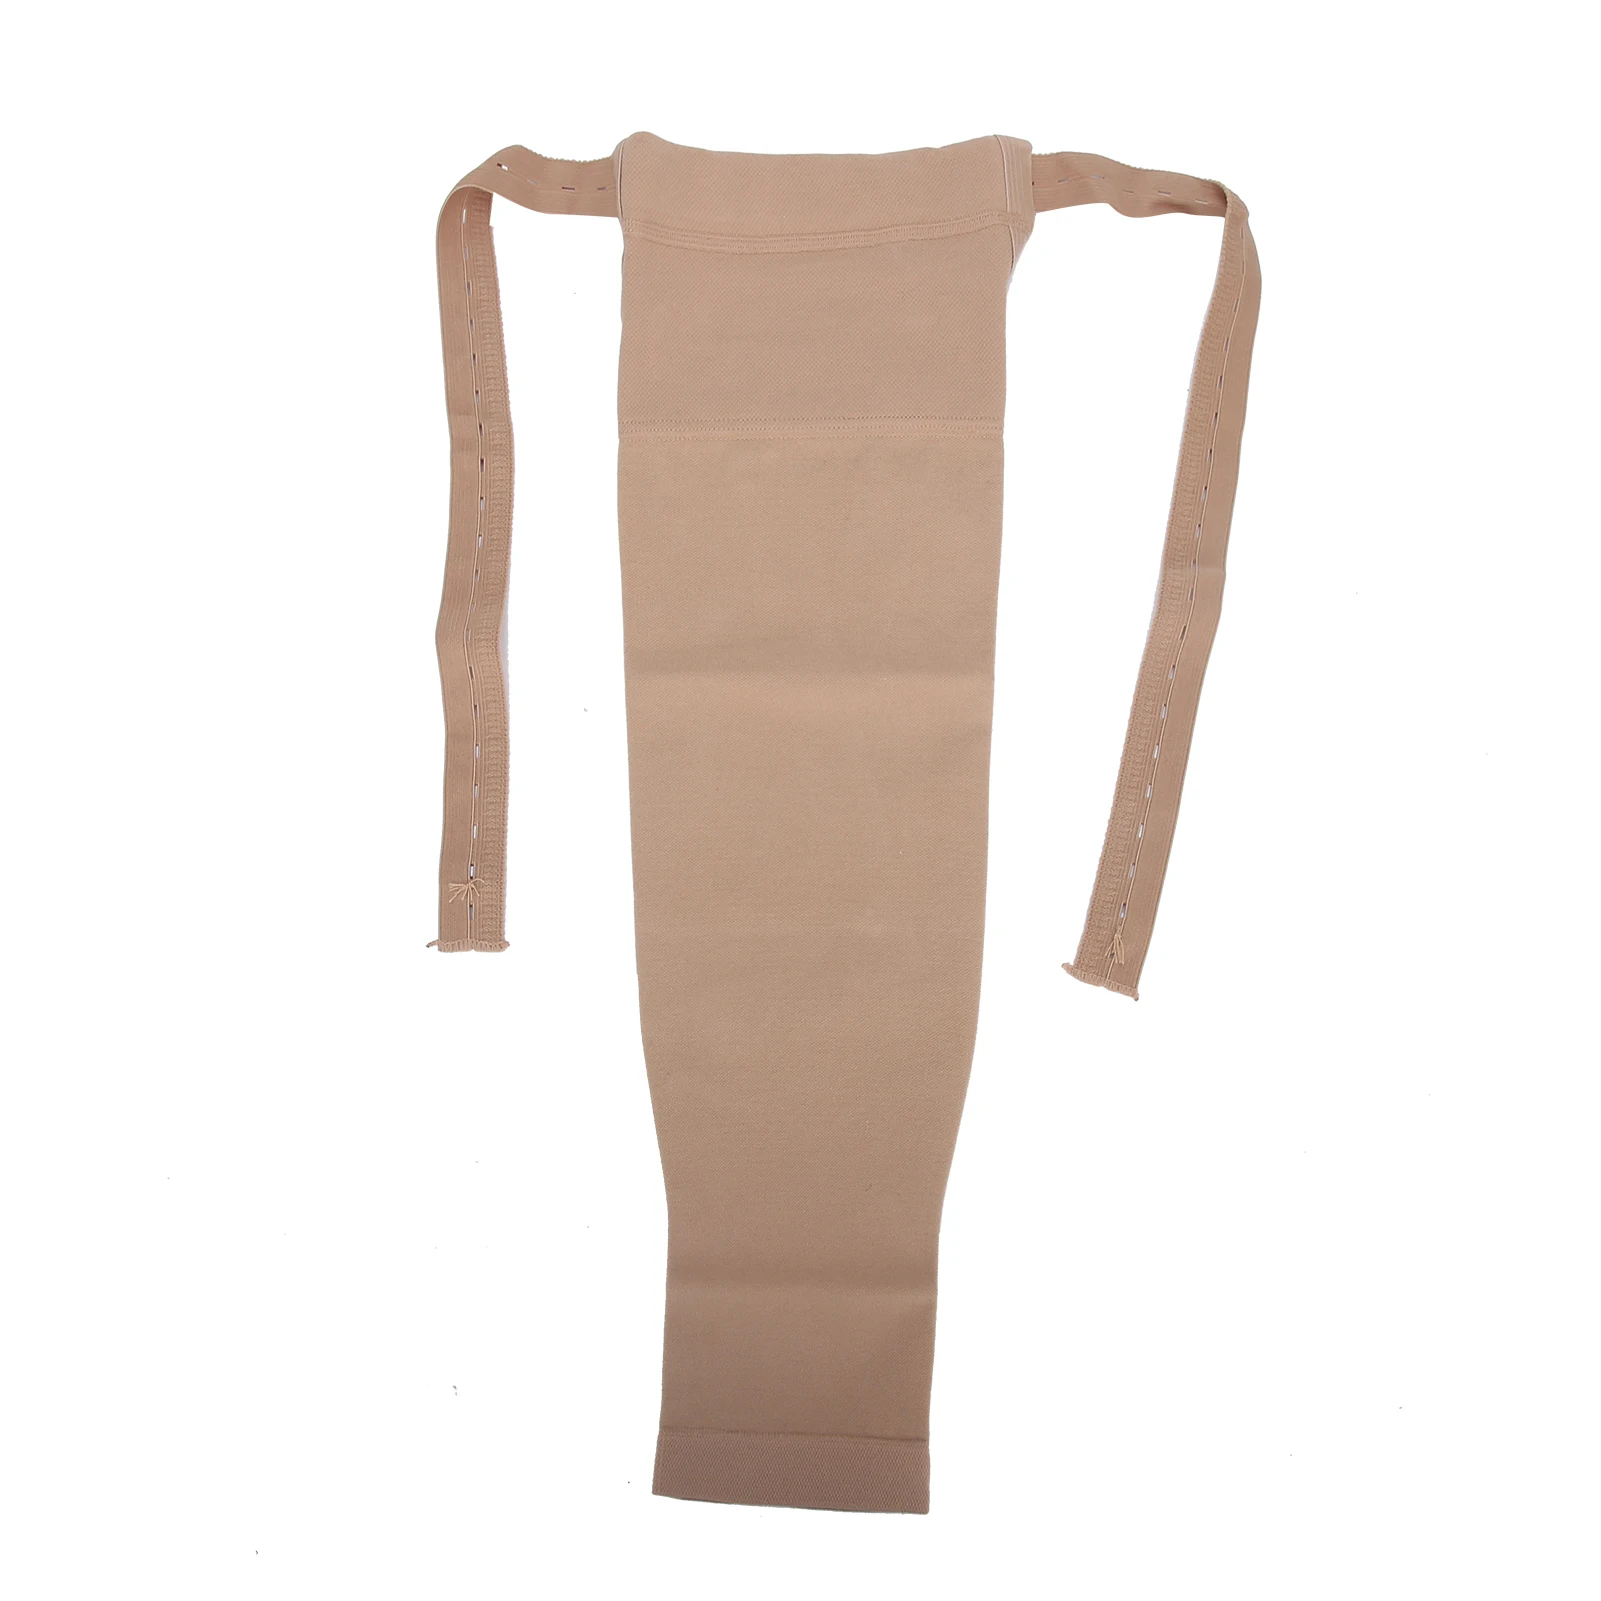 https://ae01.alicdn.com/kf/H2c942d7b147a4e268a01947f4499e6d03/Various-Sizes-Posture-Corrector-Post-Mastectomy-Compression-Sleeve-Elastic-Arm-Swelling-Lymphedema-Relief-Sleeve-Soft-Fits.jpg